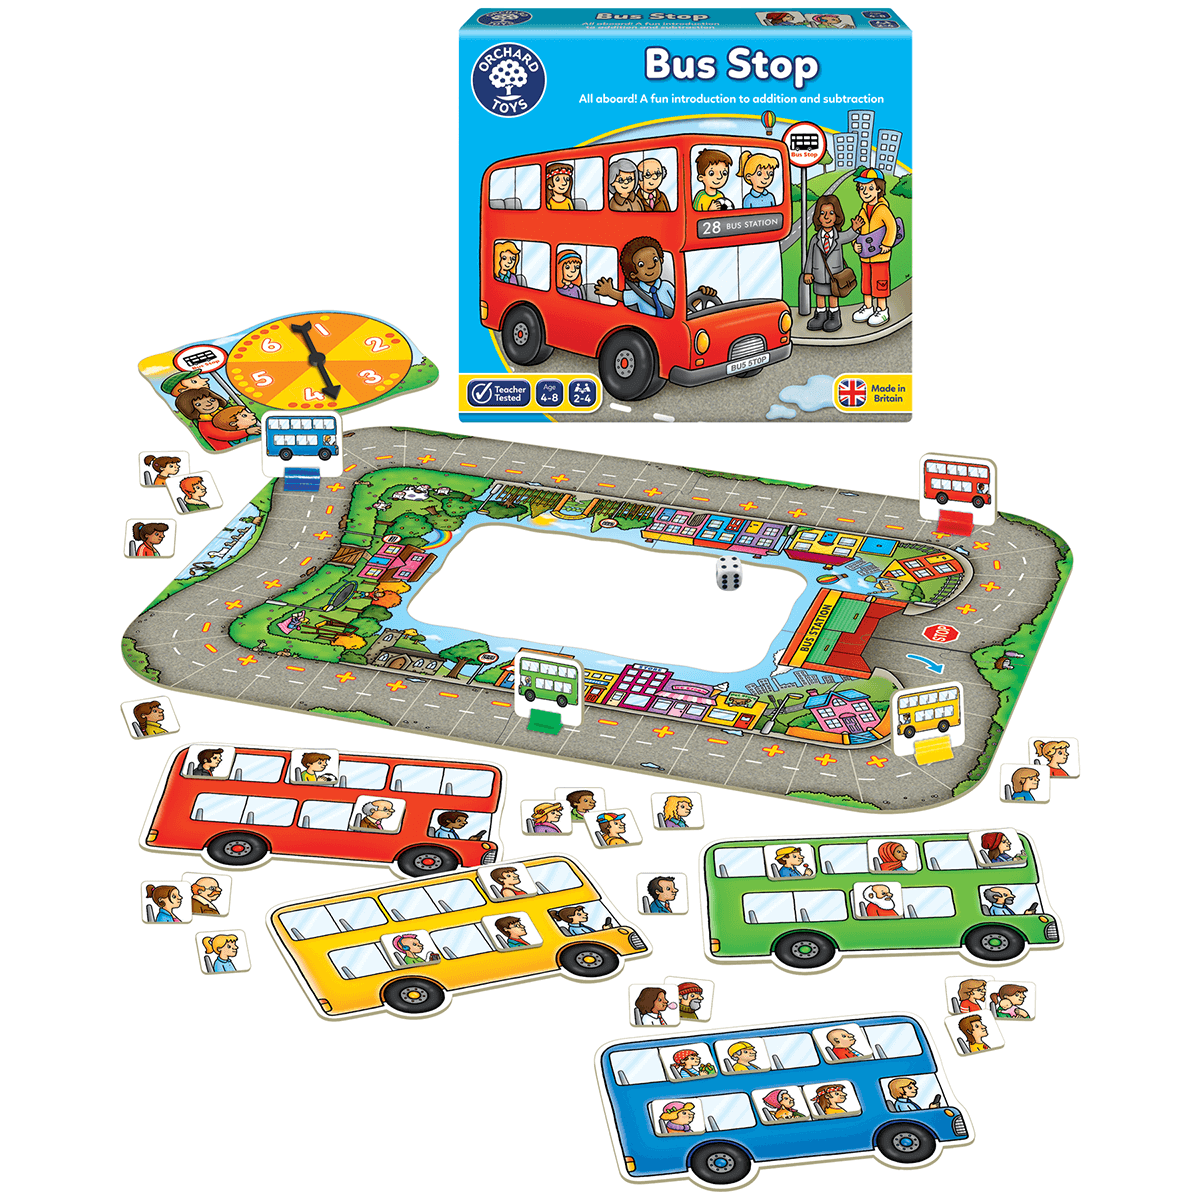 Details about  / Orchard Toys BUS STOP Kids//Childrens Fun Addition And Subtraction Race Game BNIB